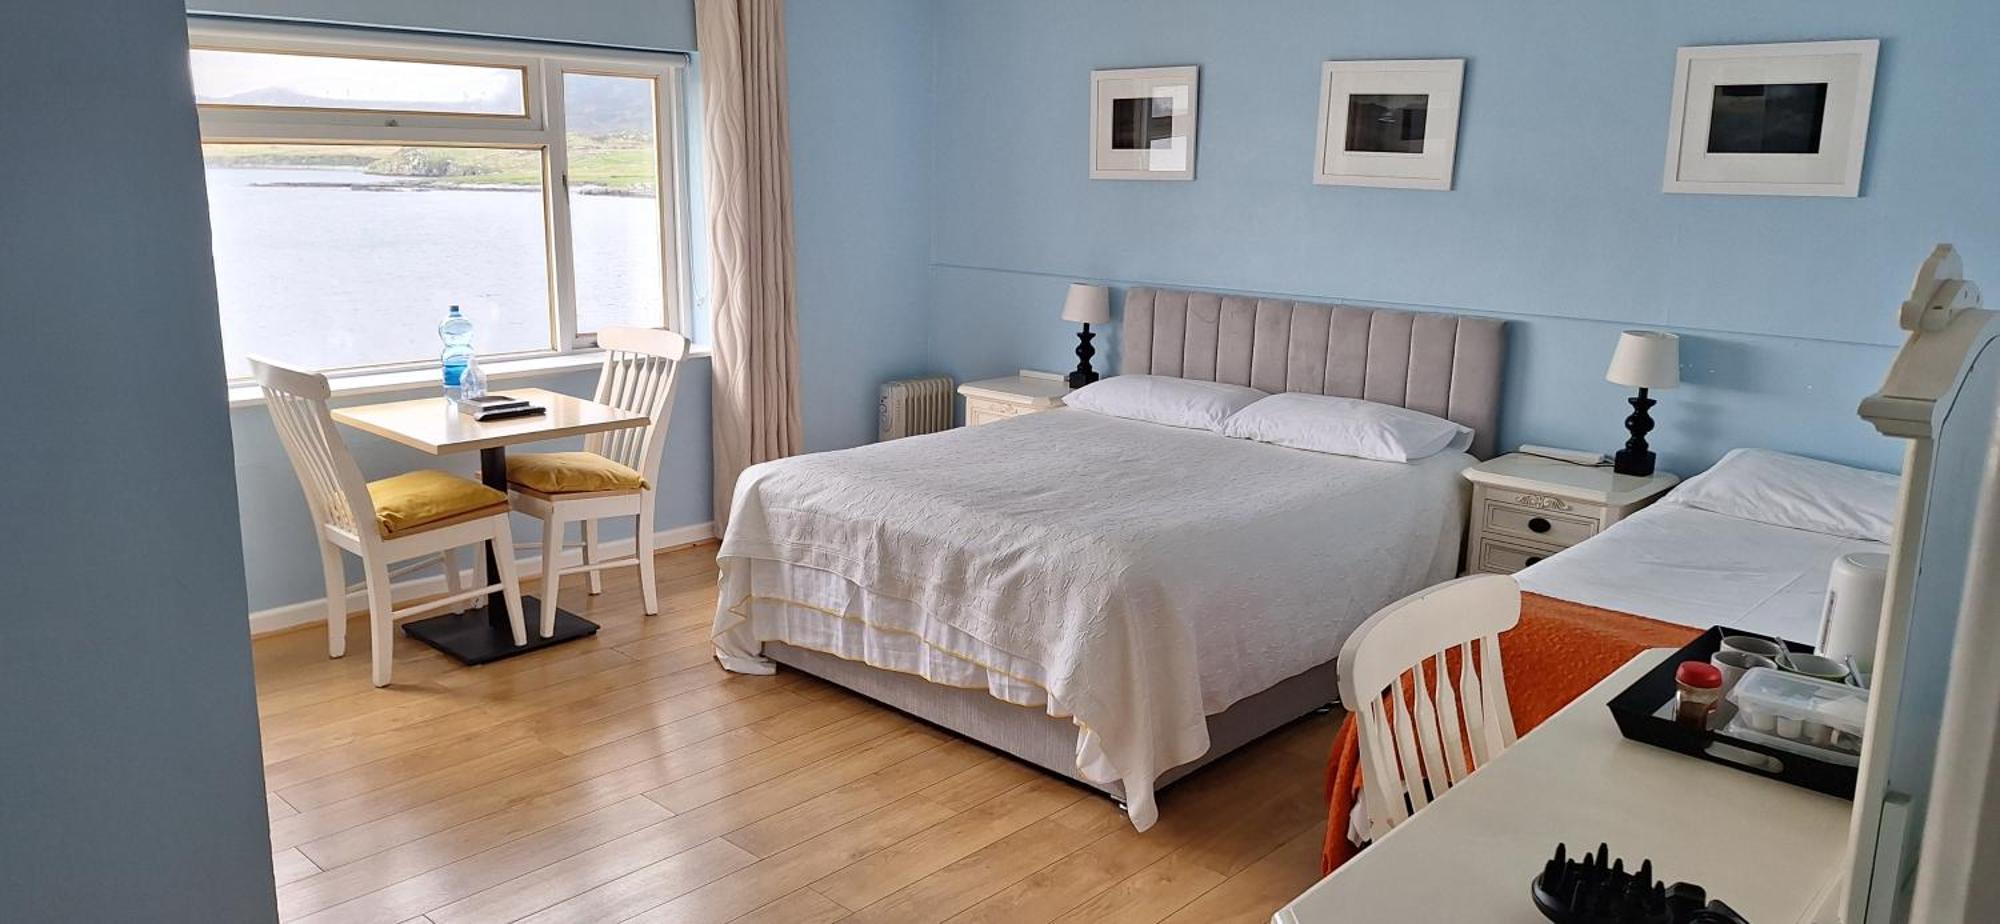 Horizon View Lodge Bed And Breakfast Glanleam Road Knightstown Valentia Island County Kerry V23 W447 Ireland Knights Town Room photo